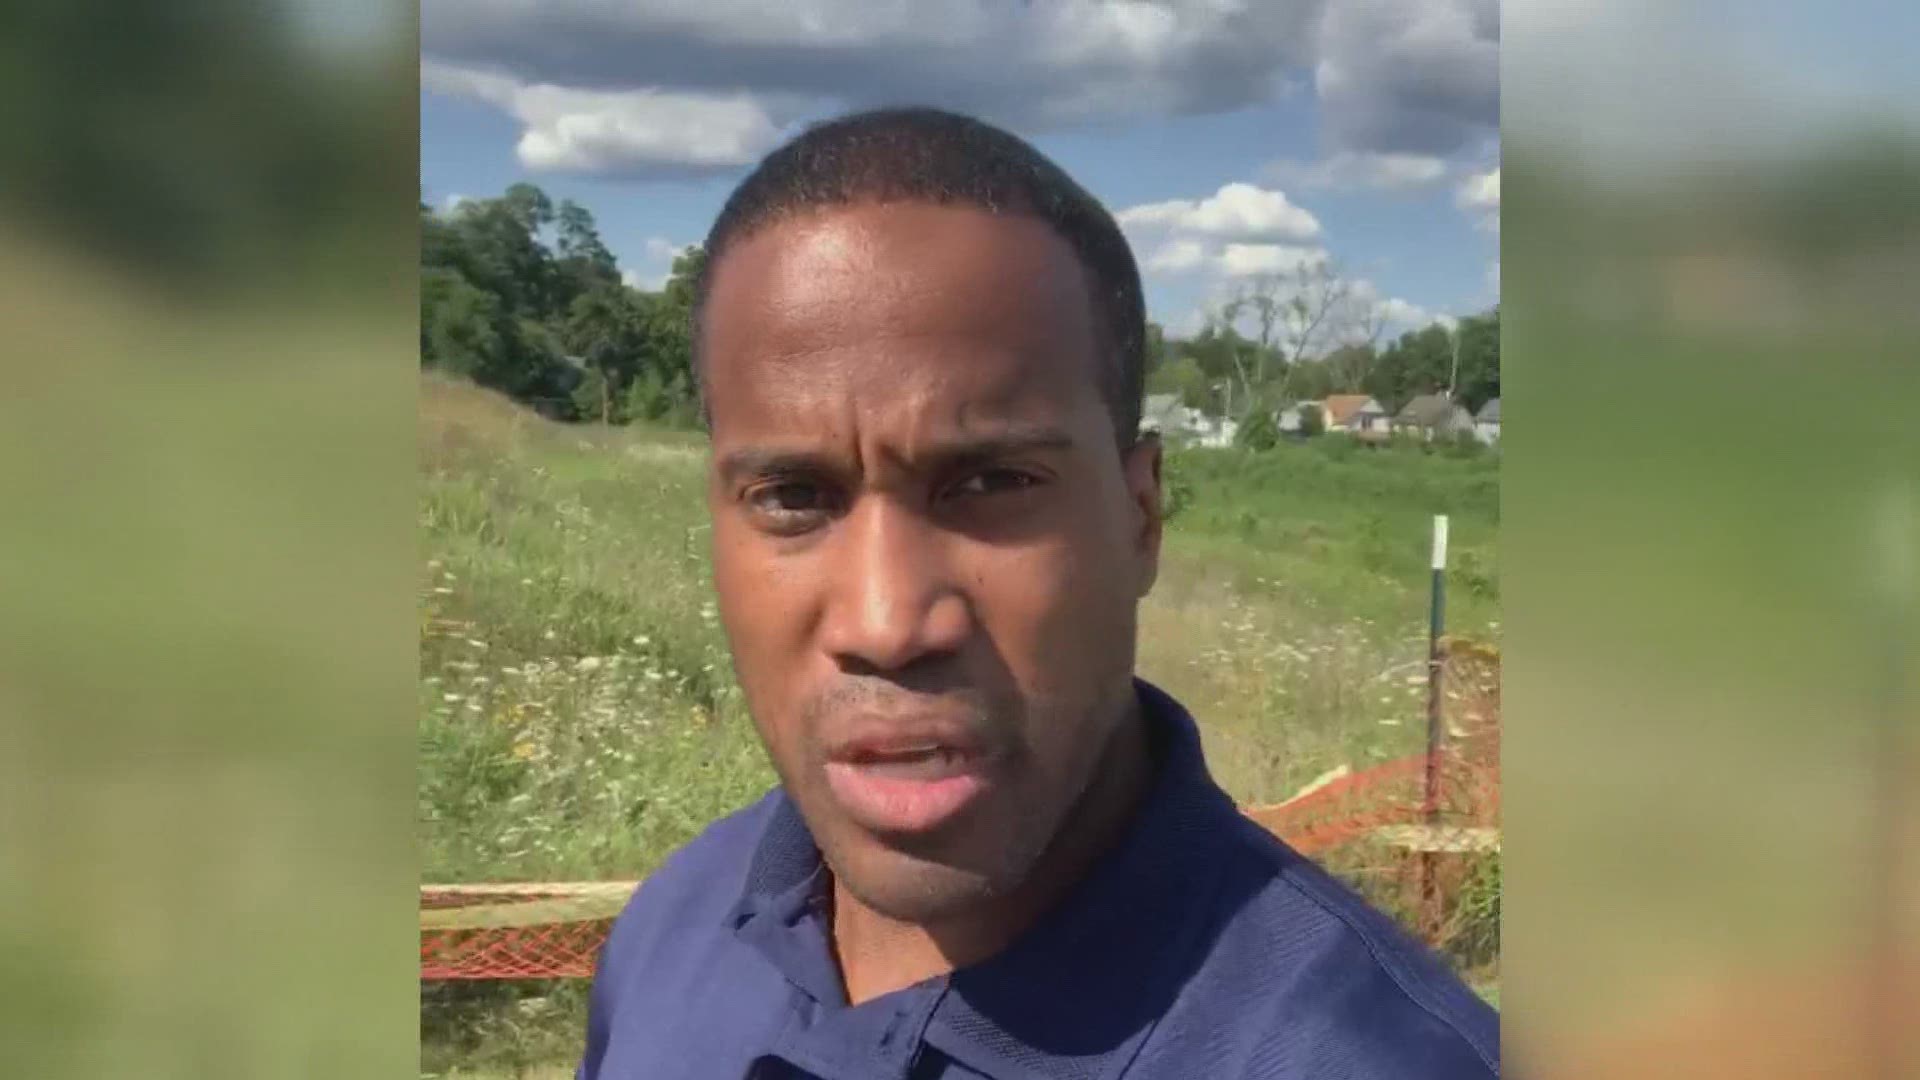 13 On Your Side's Nick LaFave spoke with Republican Senate candidate John James about unemployment benefits.